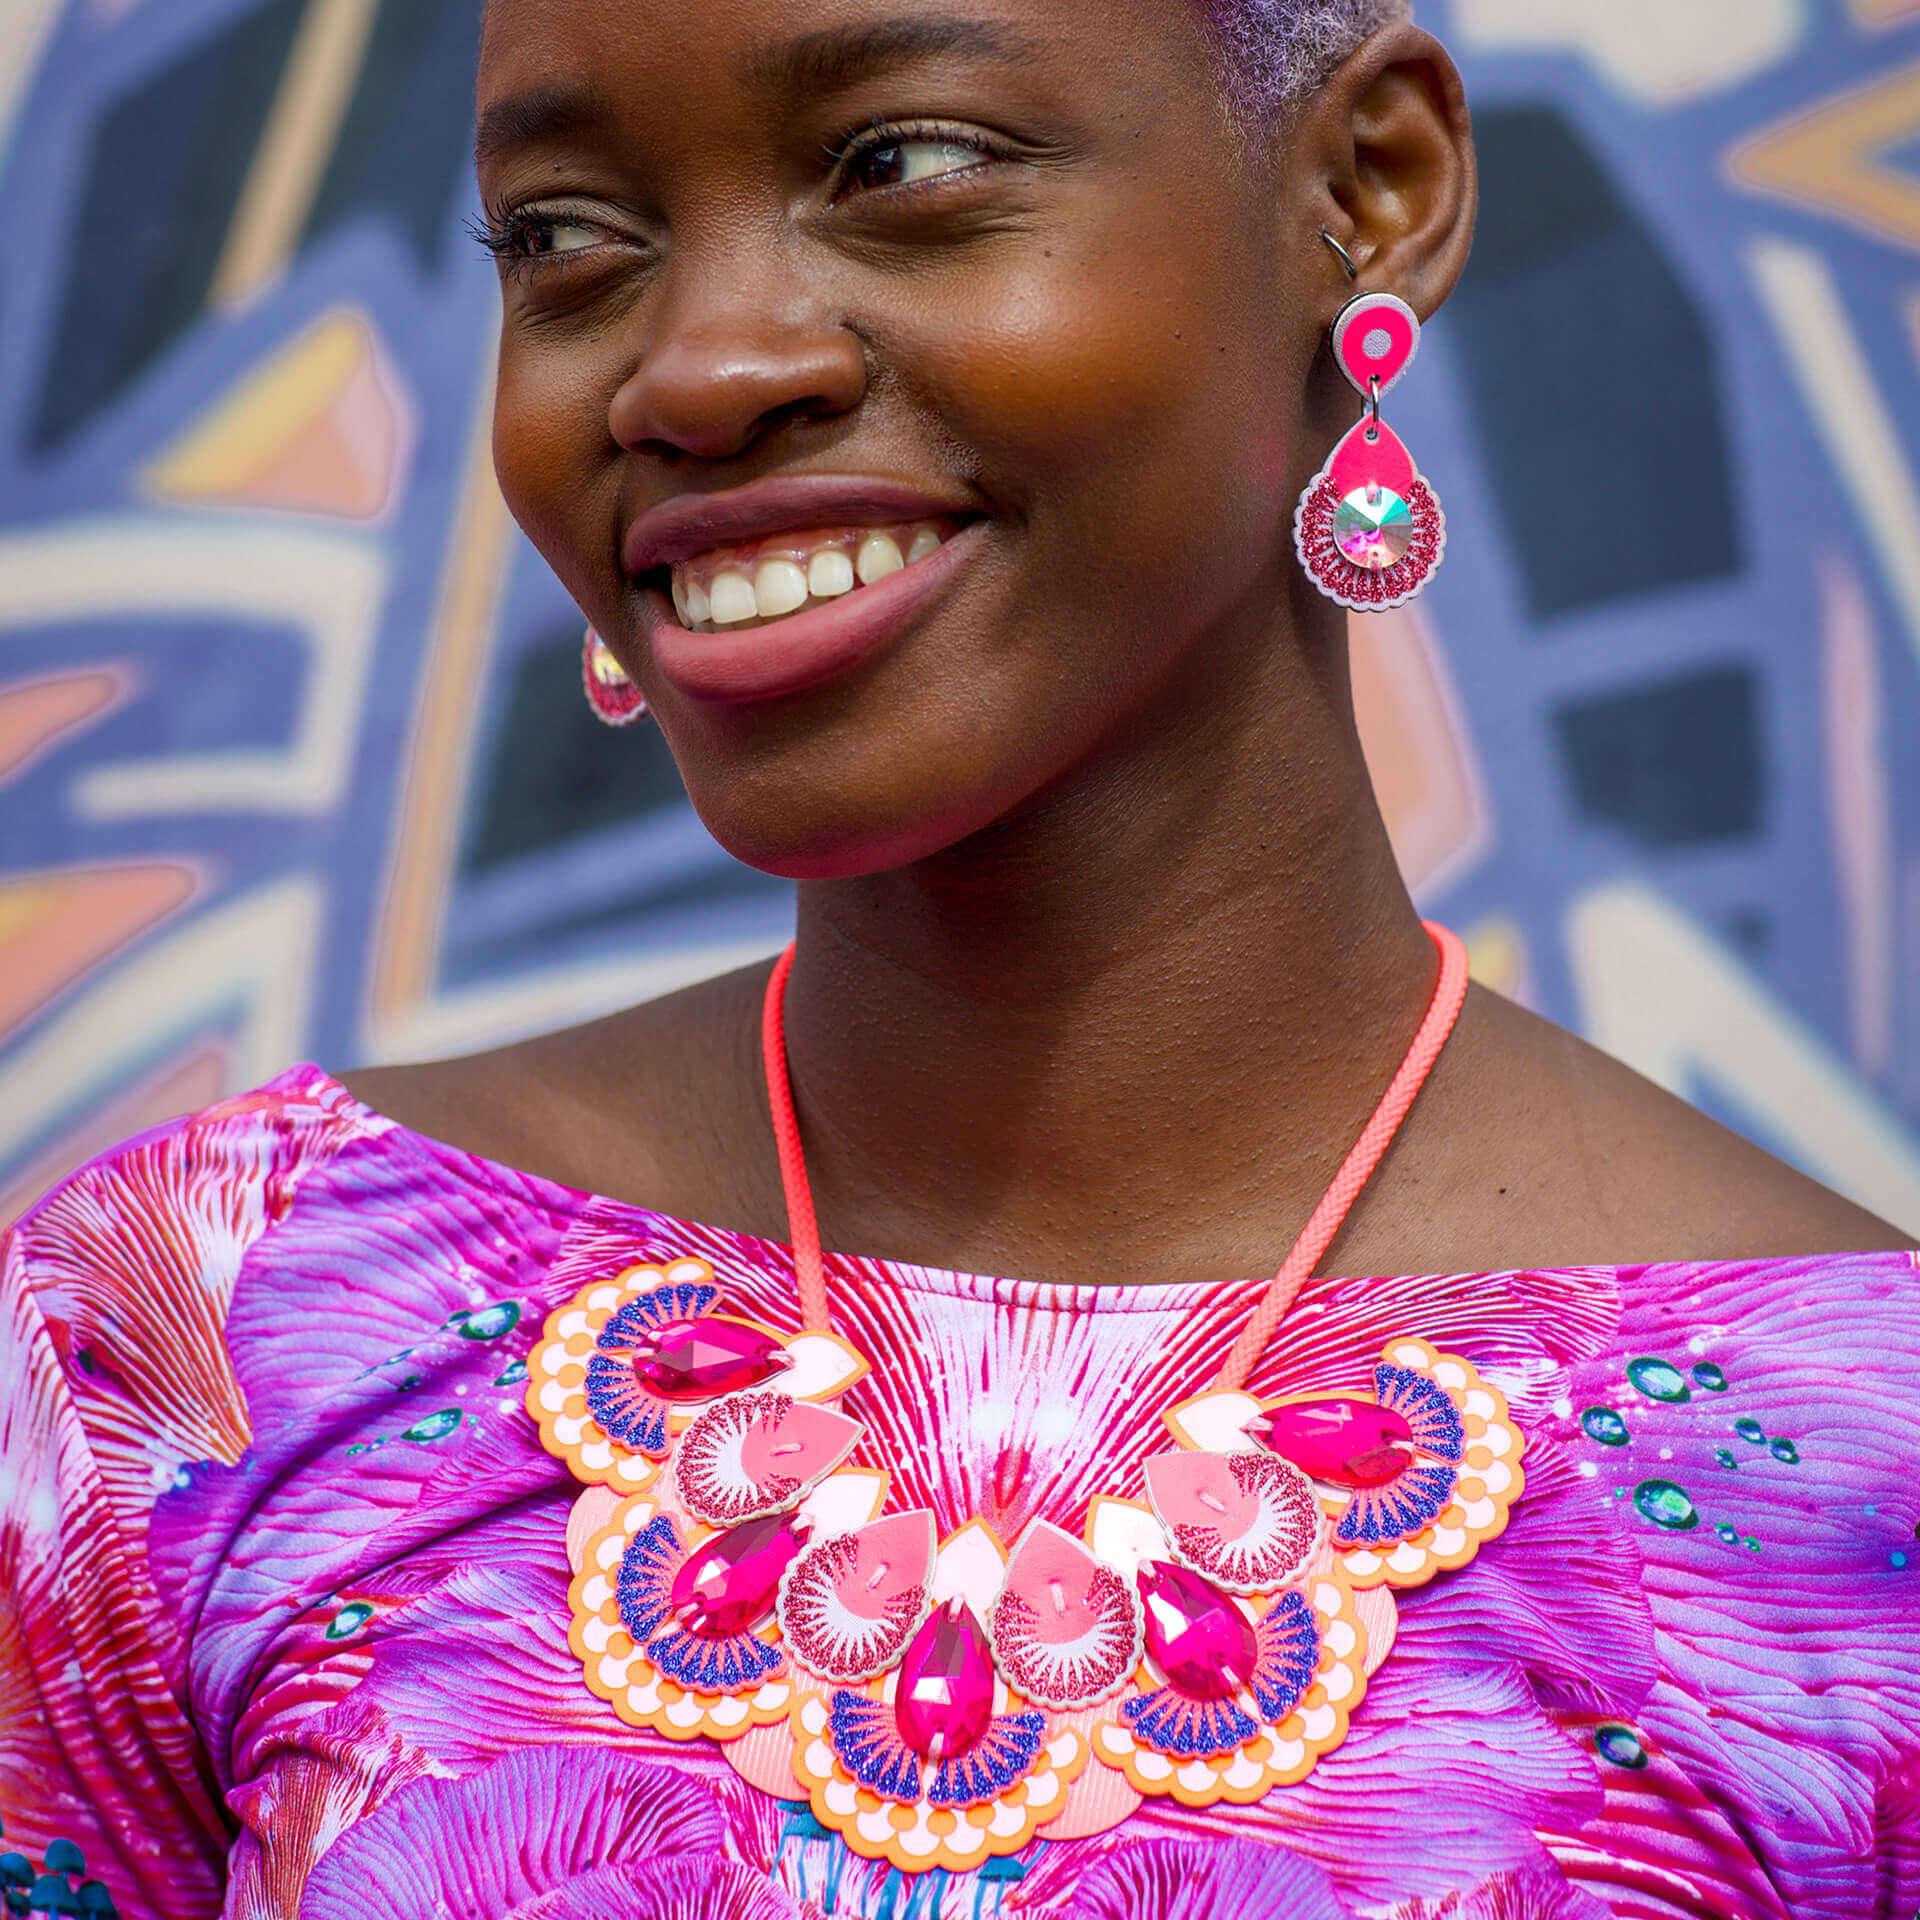 A black woman wearing a bright pink and purple patterned lycra top, dangly pink earrings and a colourful bib necklace is smiling and looking away from the camera. The photo has been cropped so only her face and upper body is visible. Behind her some lilac, blue and pink angular street art is seen but out of focus